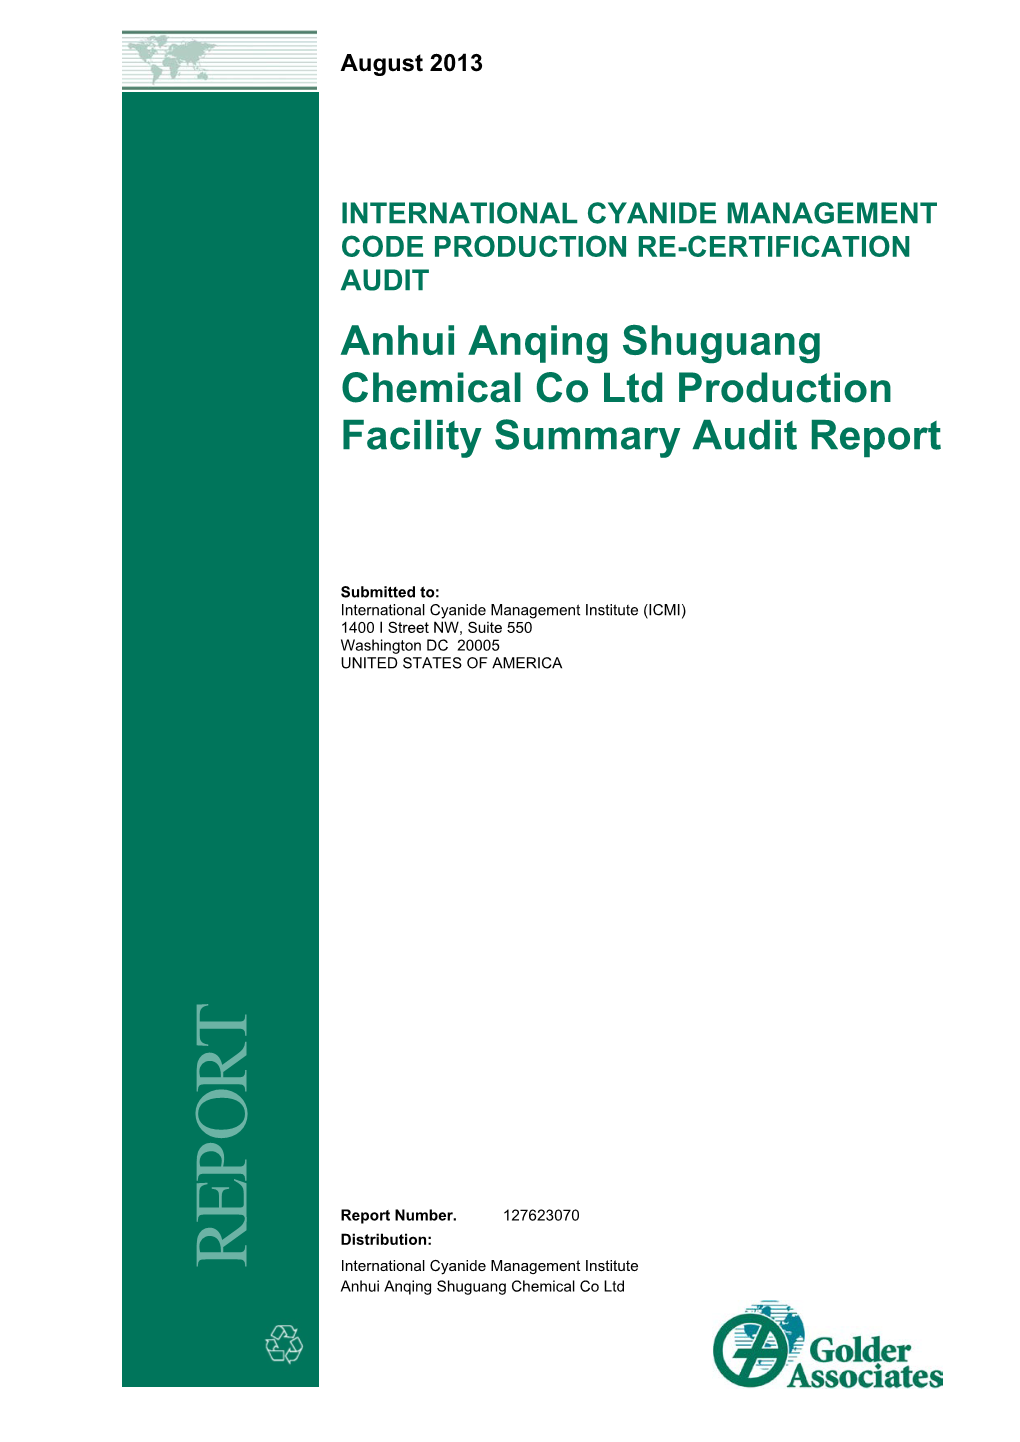 Anhui Anqing Shuguang Chemical Co Ltd Production Facility Summary Audit Report